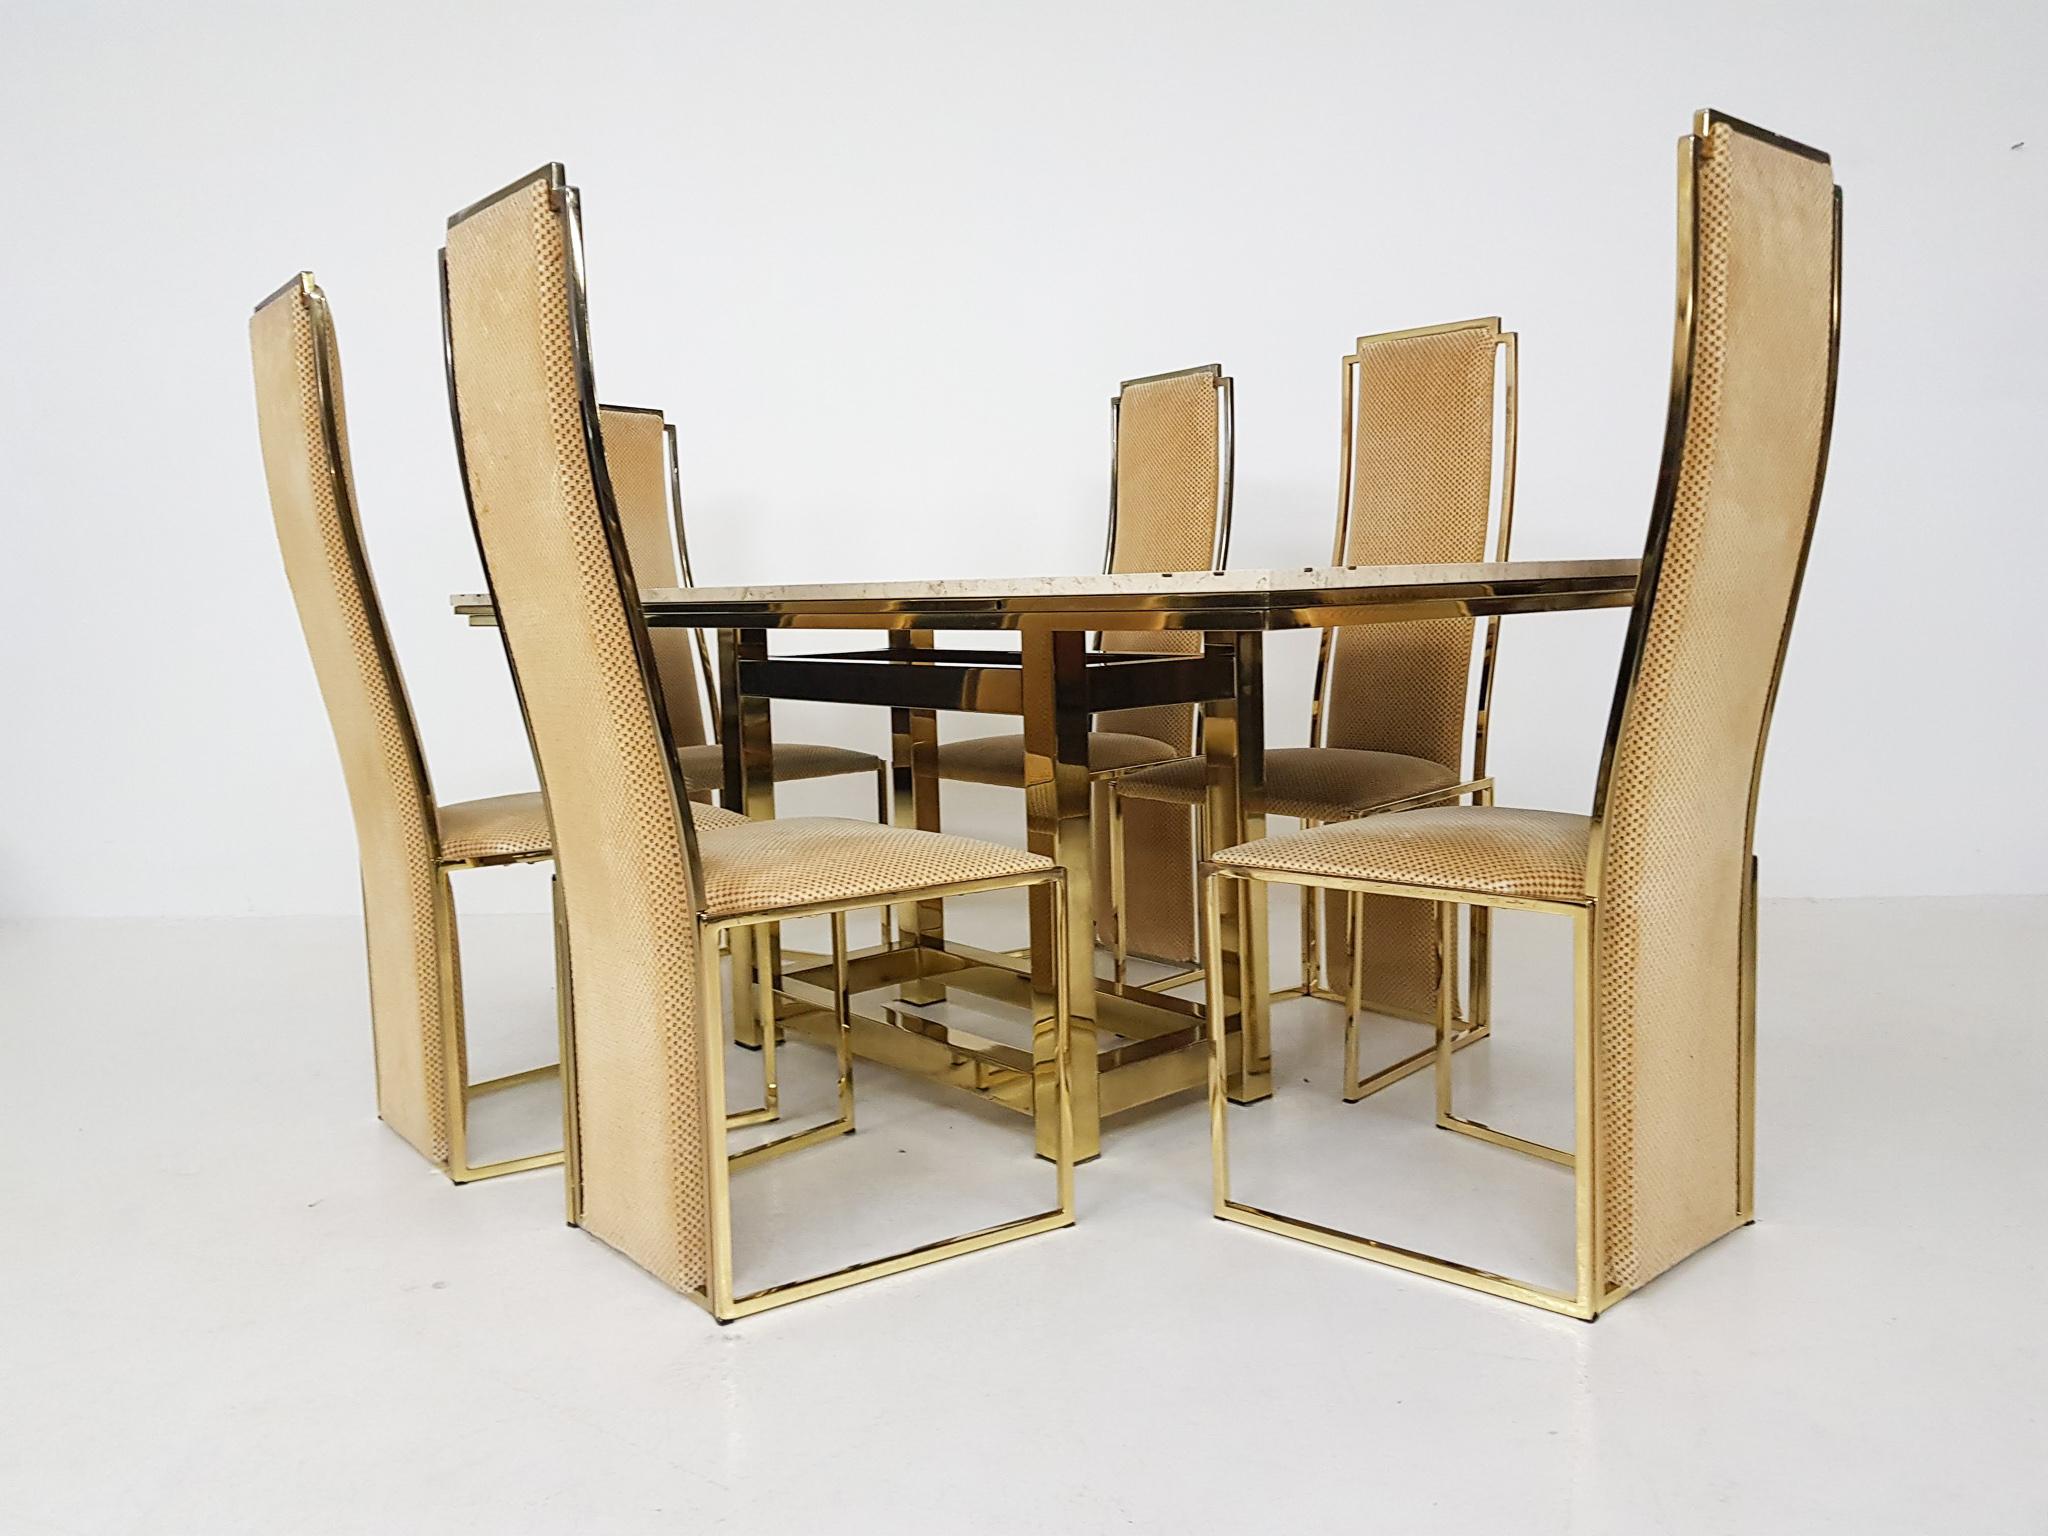 French Alain Delon Travertine, Brass and Gold Dining Set, France, 1980s